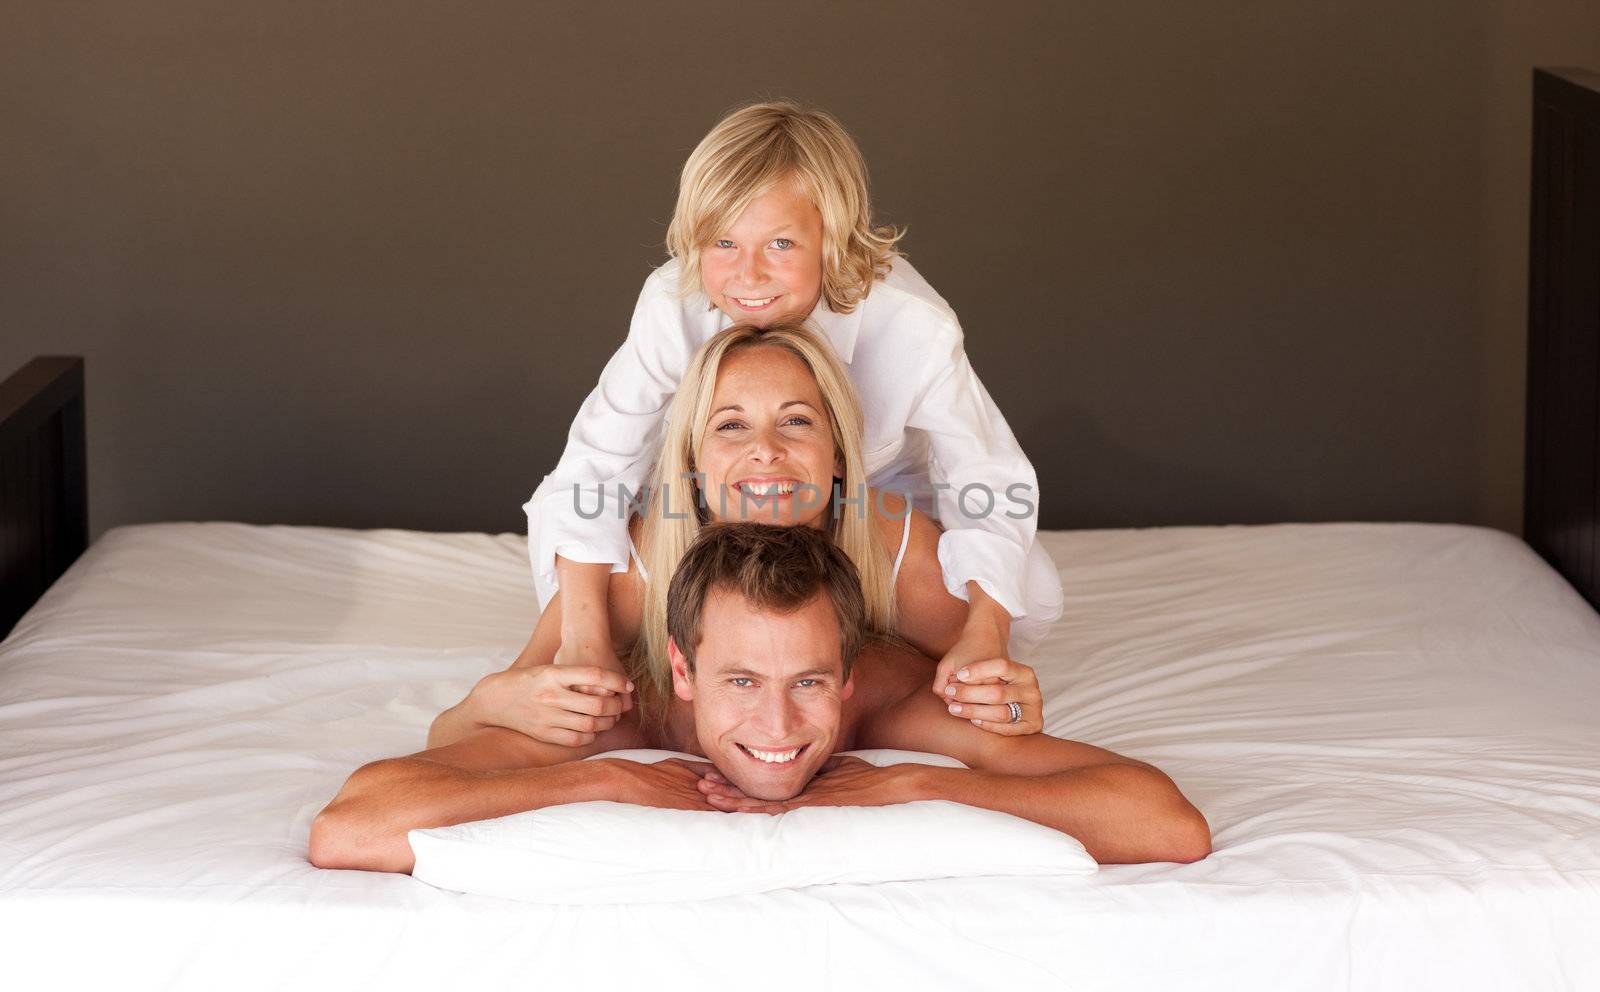 Cute little boy and his parents having fun lying on the bed by Wavebreakmedia